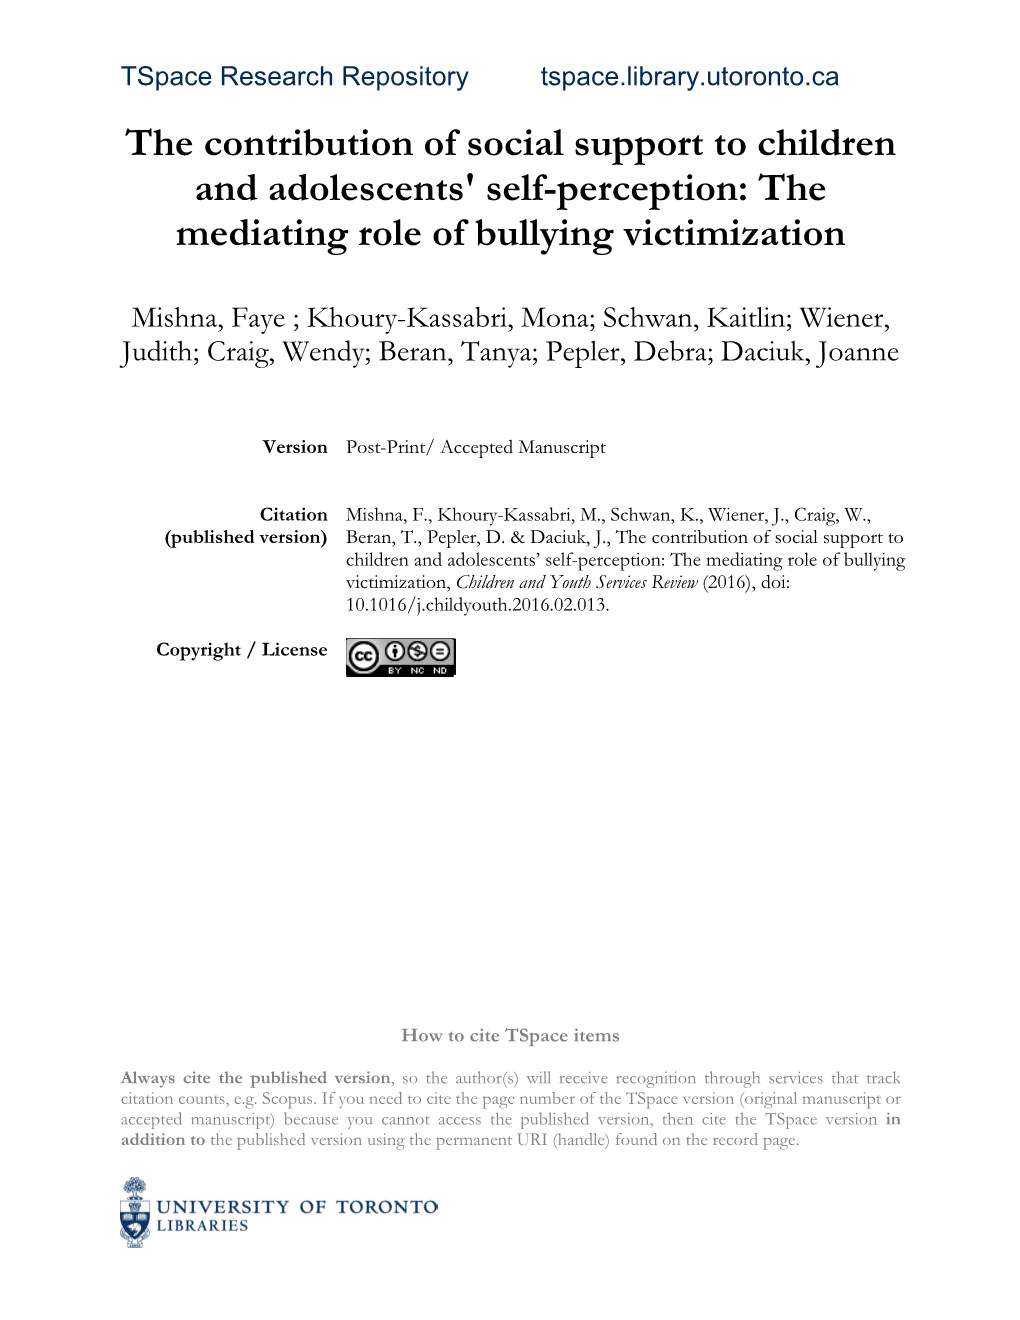 The Contribution of Social Support to Children and Adolescents' Self-Perception: the Mediating Role of Bullying Victimization